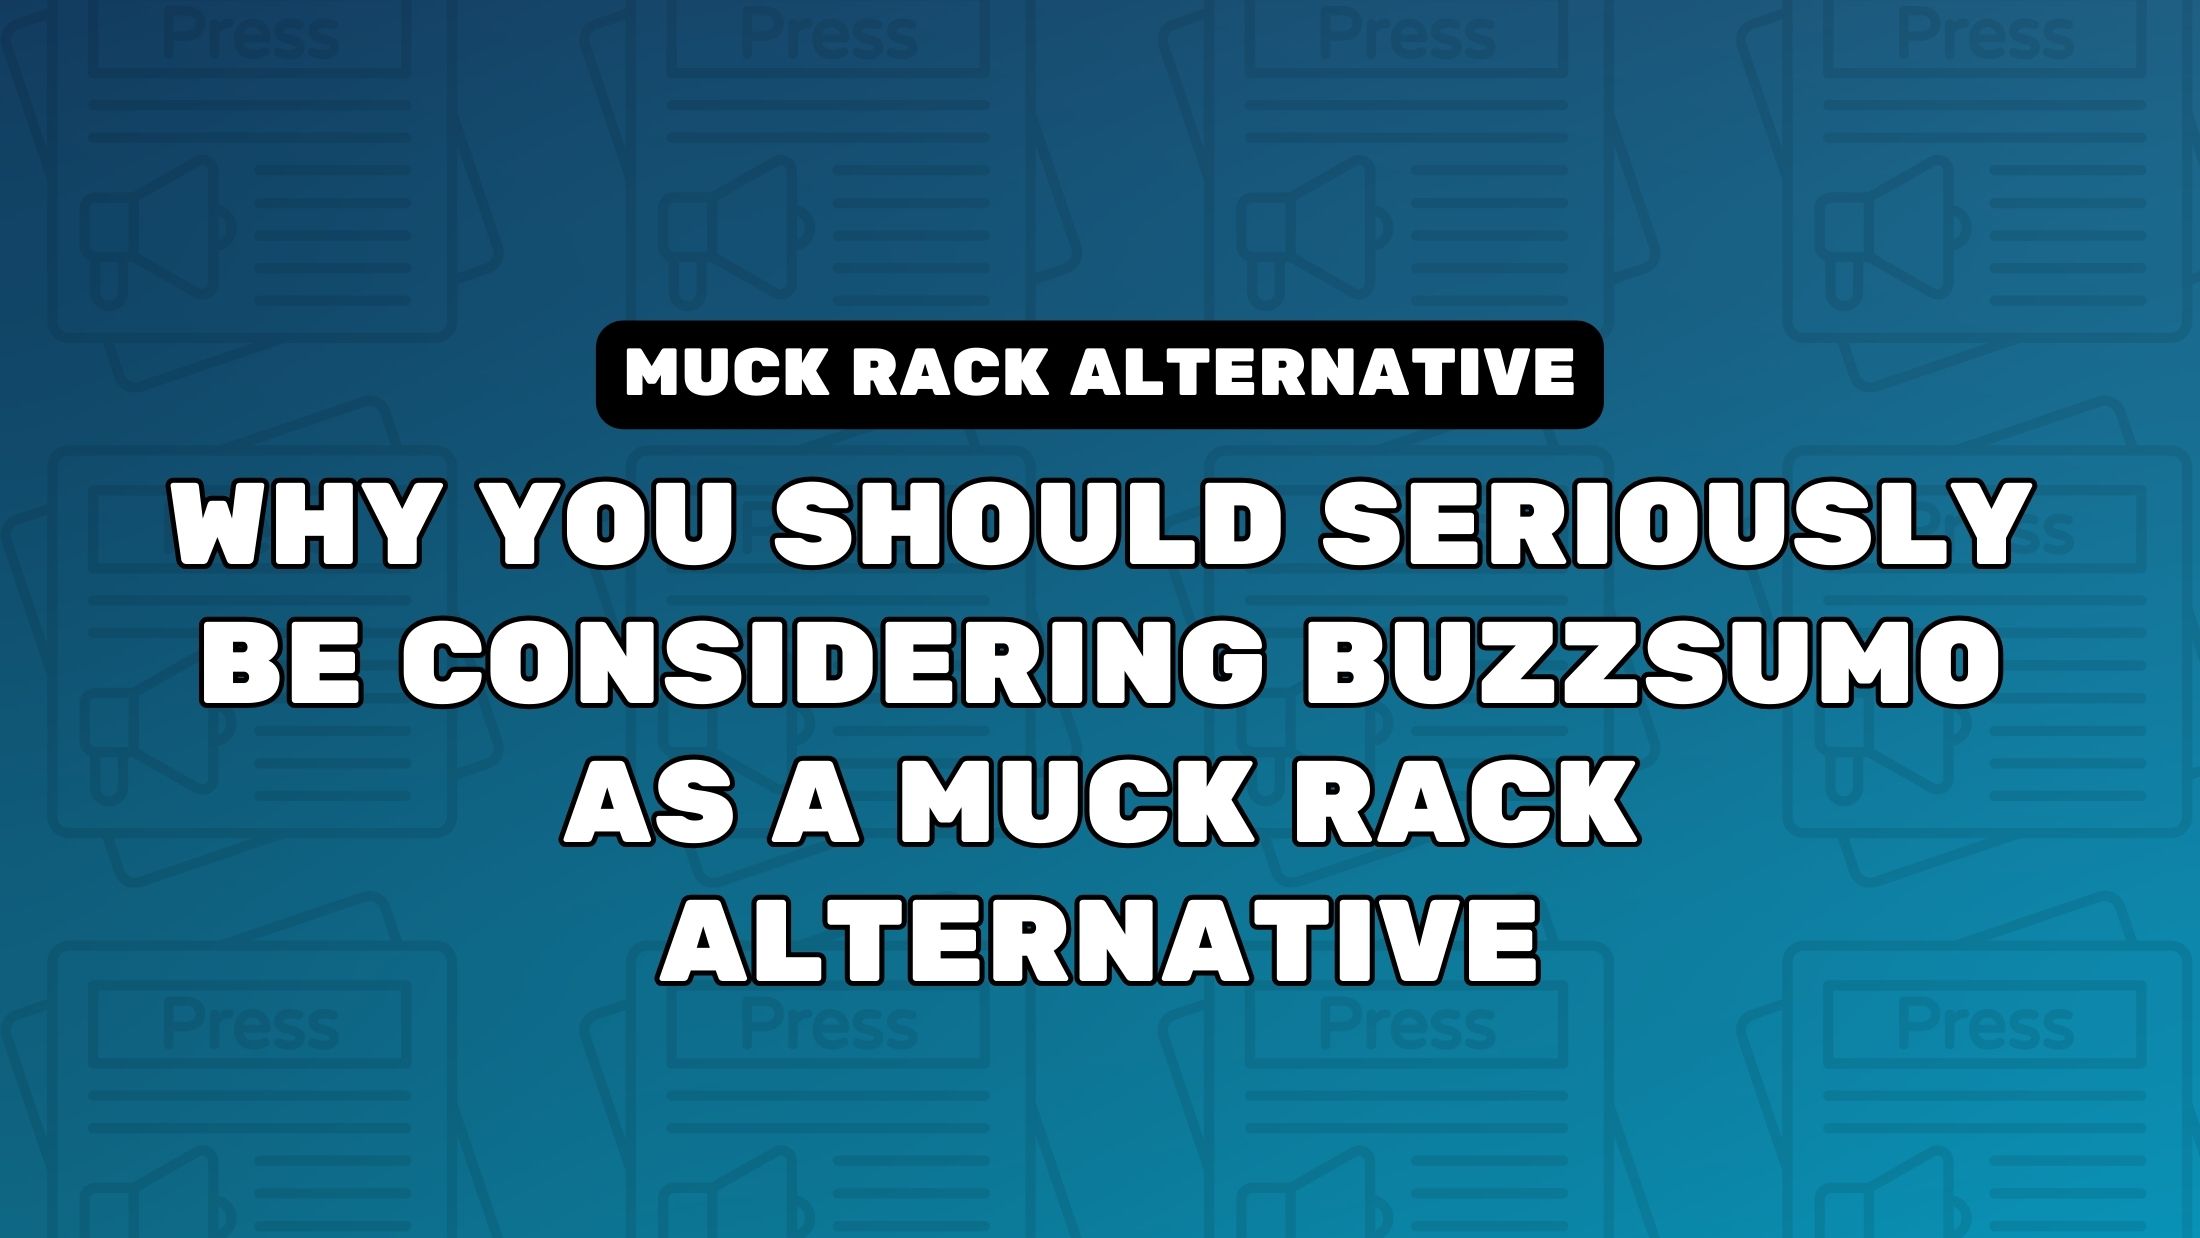 Why You Should Seriously Be Considering BuzzSumo As A Muck Rack Alternative